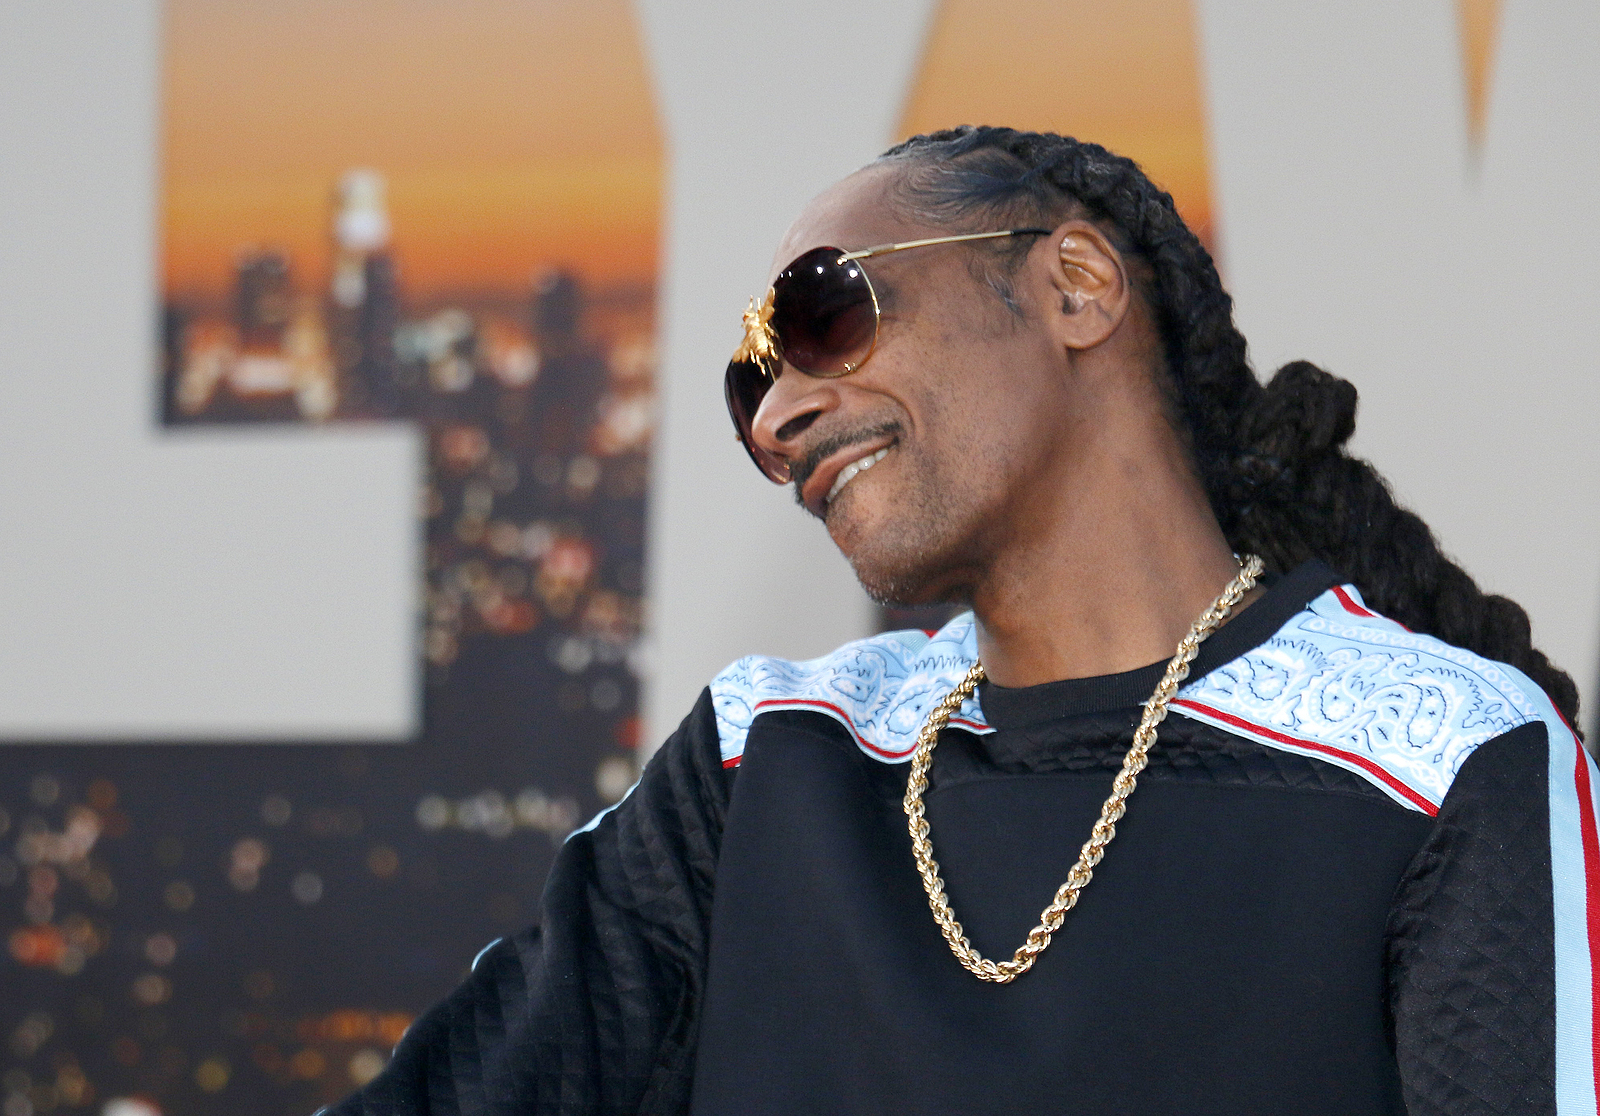 How Snoop Dogg Has Remained So Popular Over The Years